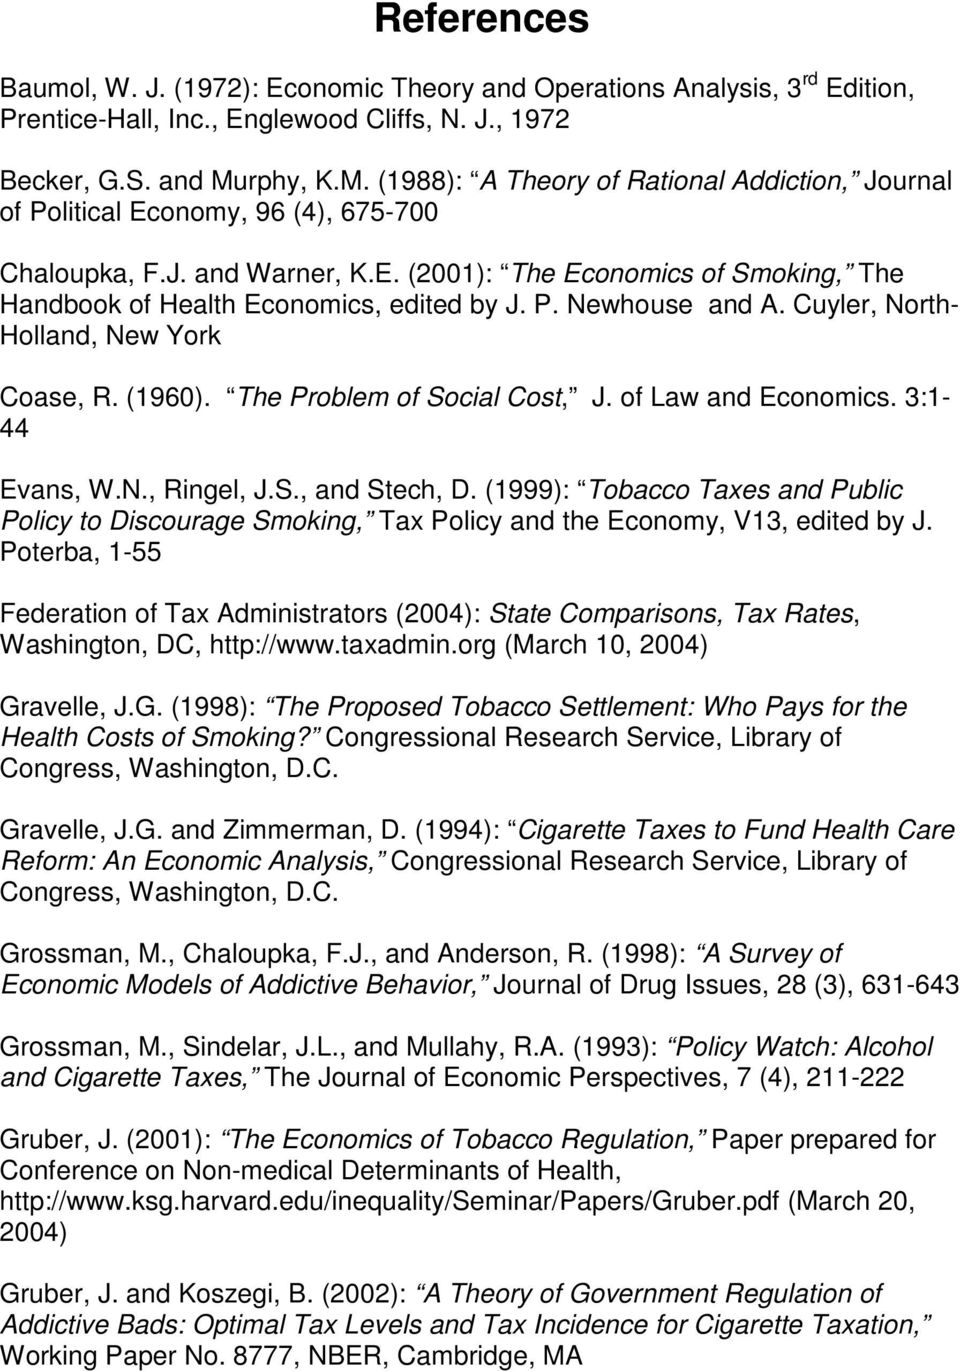 P. Newhouse and A. Cuyler, North- Holland, New York Coase, R. (1960). The Problem of Social Cost, J. of Law and Economics. 3:1-44 Evans, W.N., Ringel, J.S., and Stech, D.